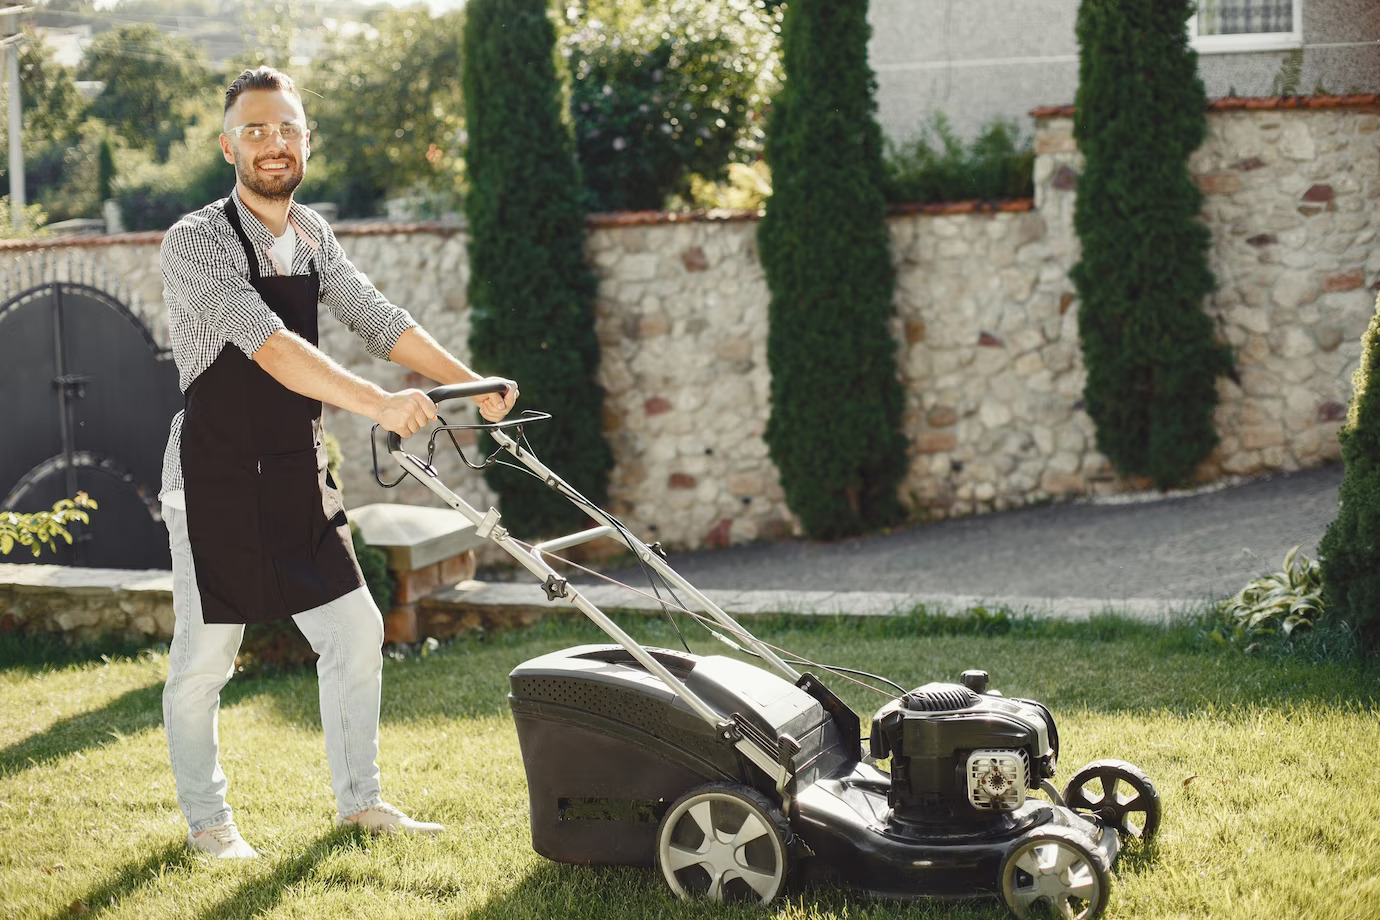 How To Start Lawncare Business